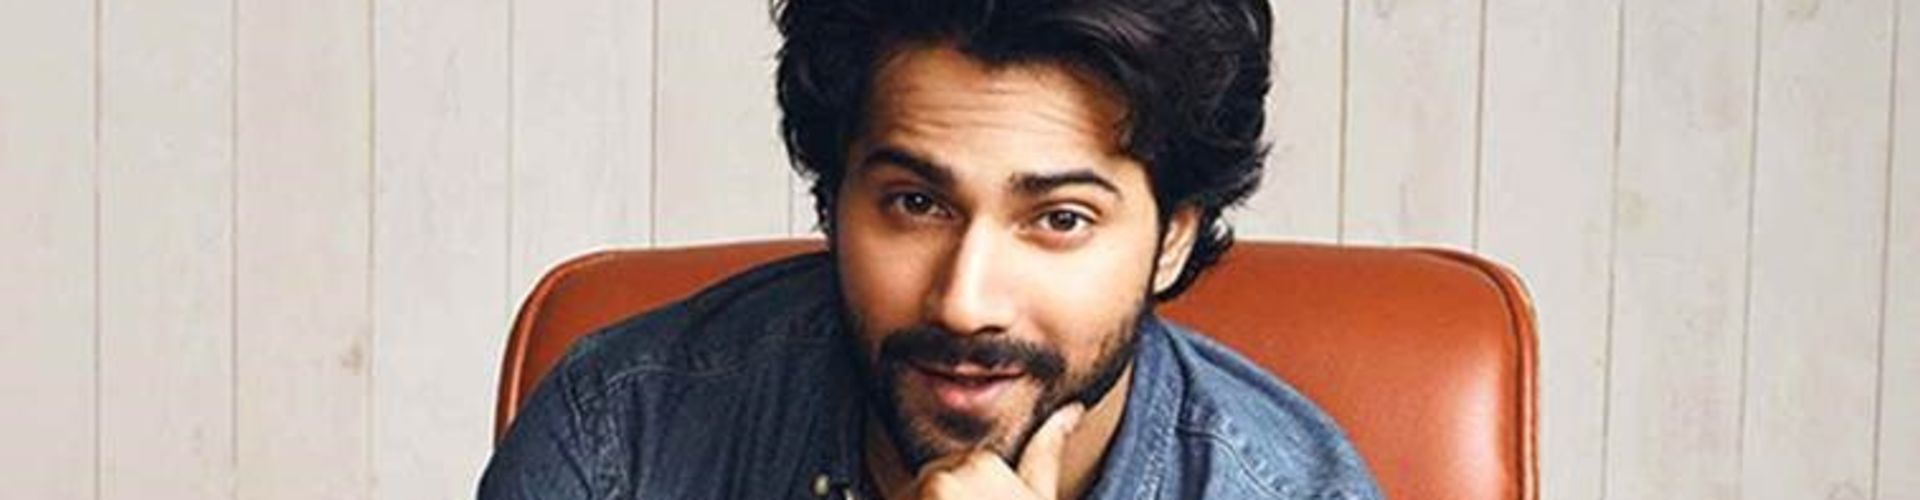 Going to work my ass off promises Varun Dhawan to his fans.